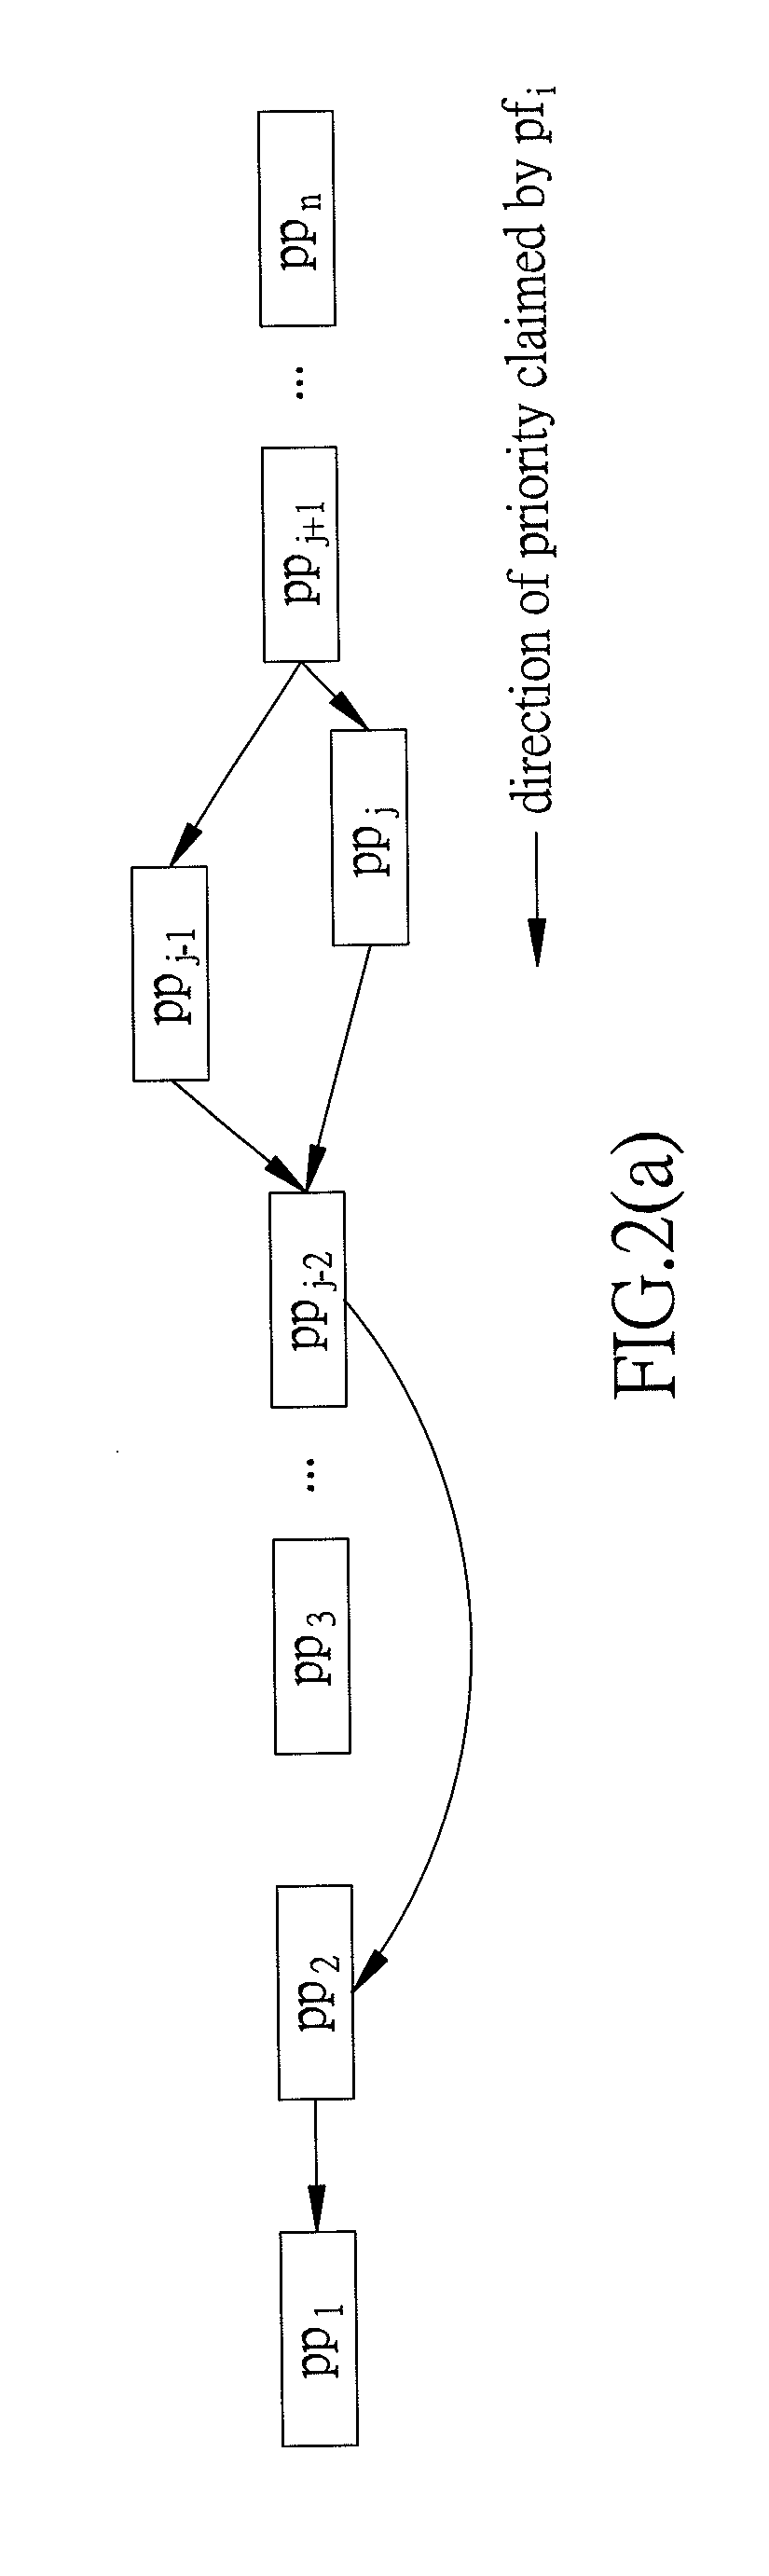 Method and system for evaluating/analyzing patent portfolio using patent priority approach